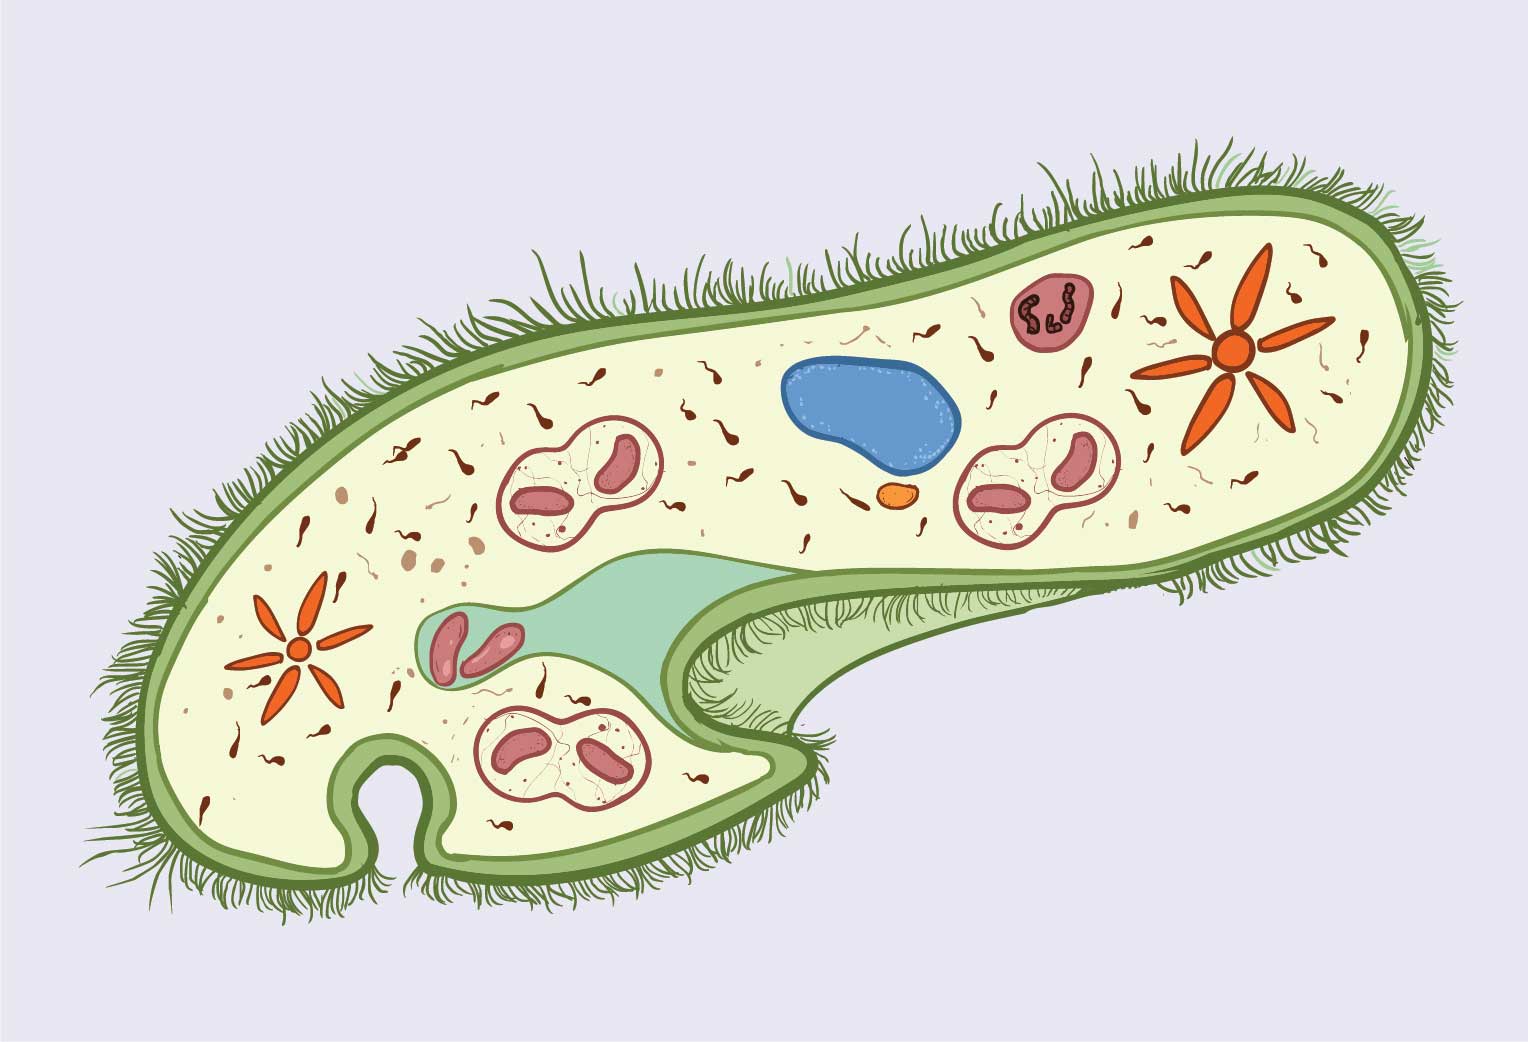 The Structure of Paramecium Cell Rs' Science